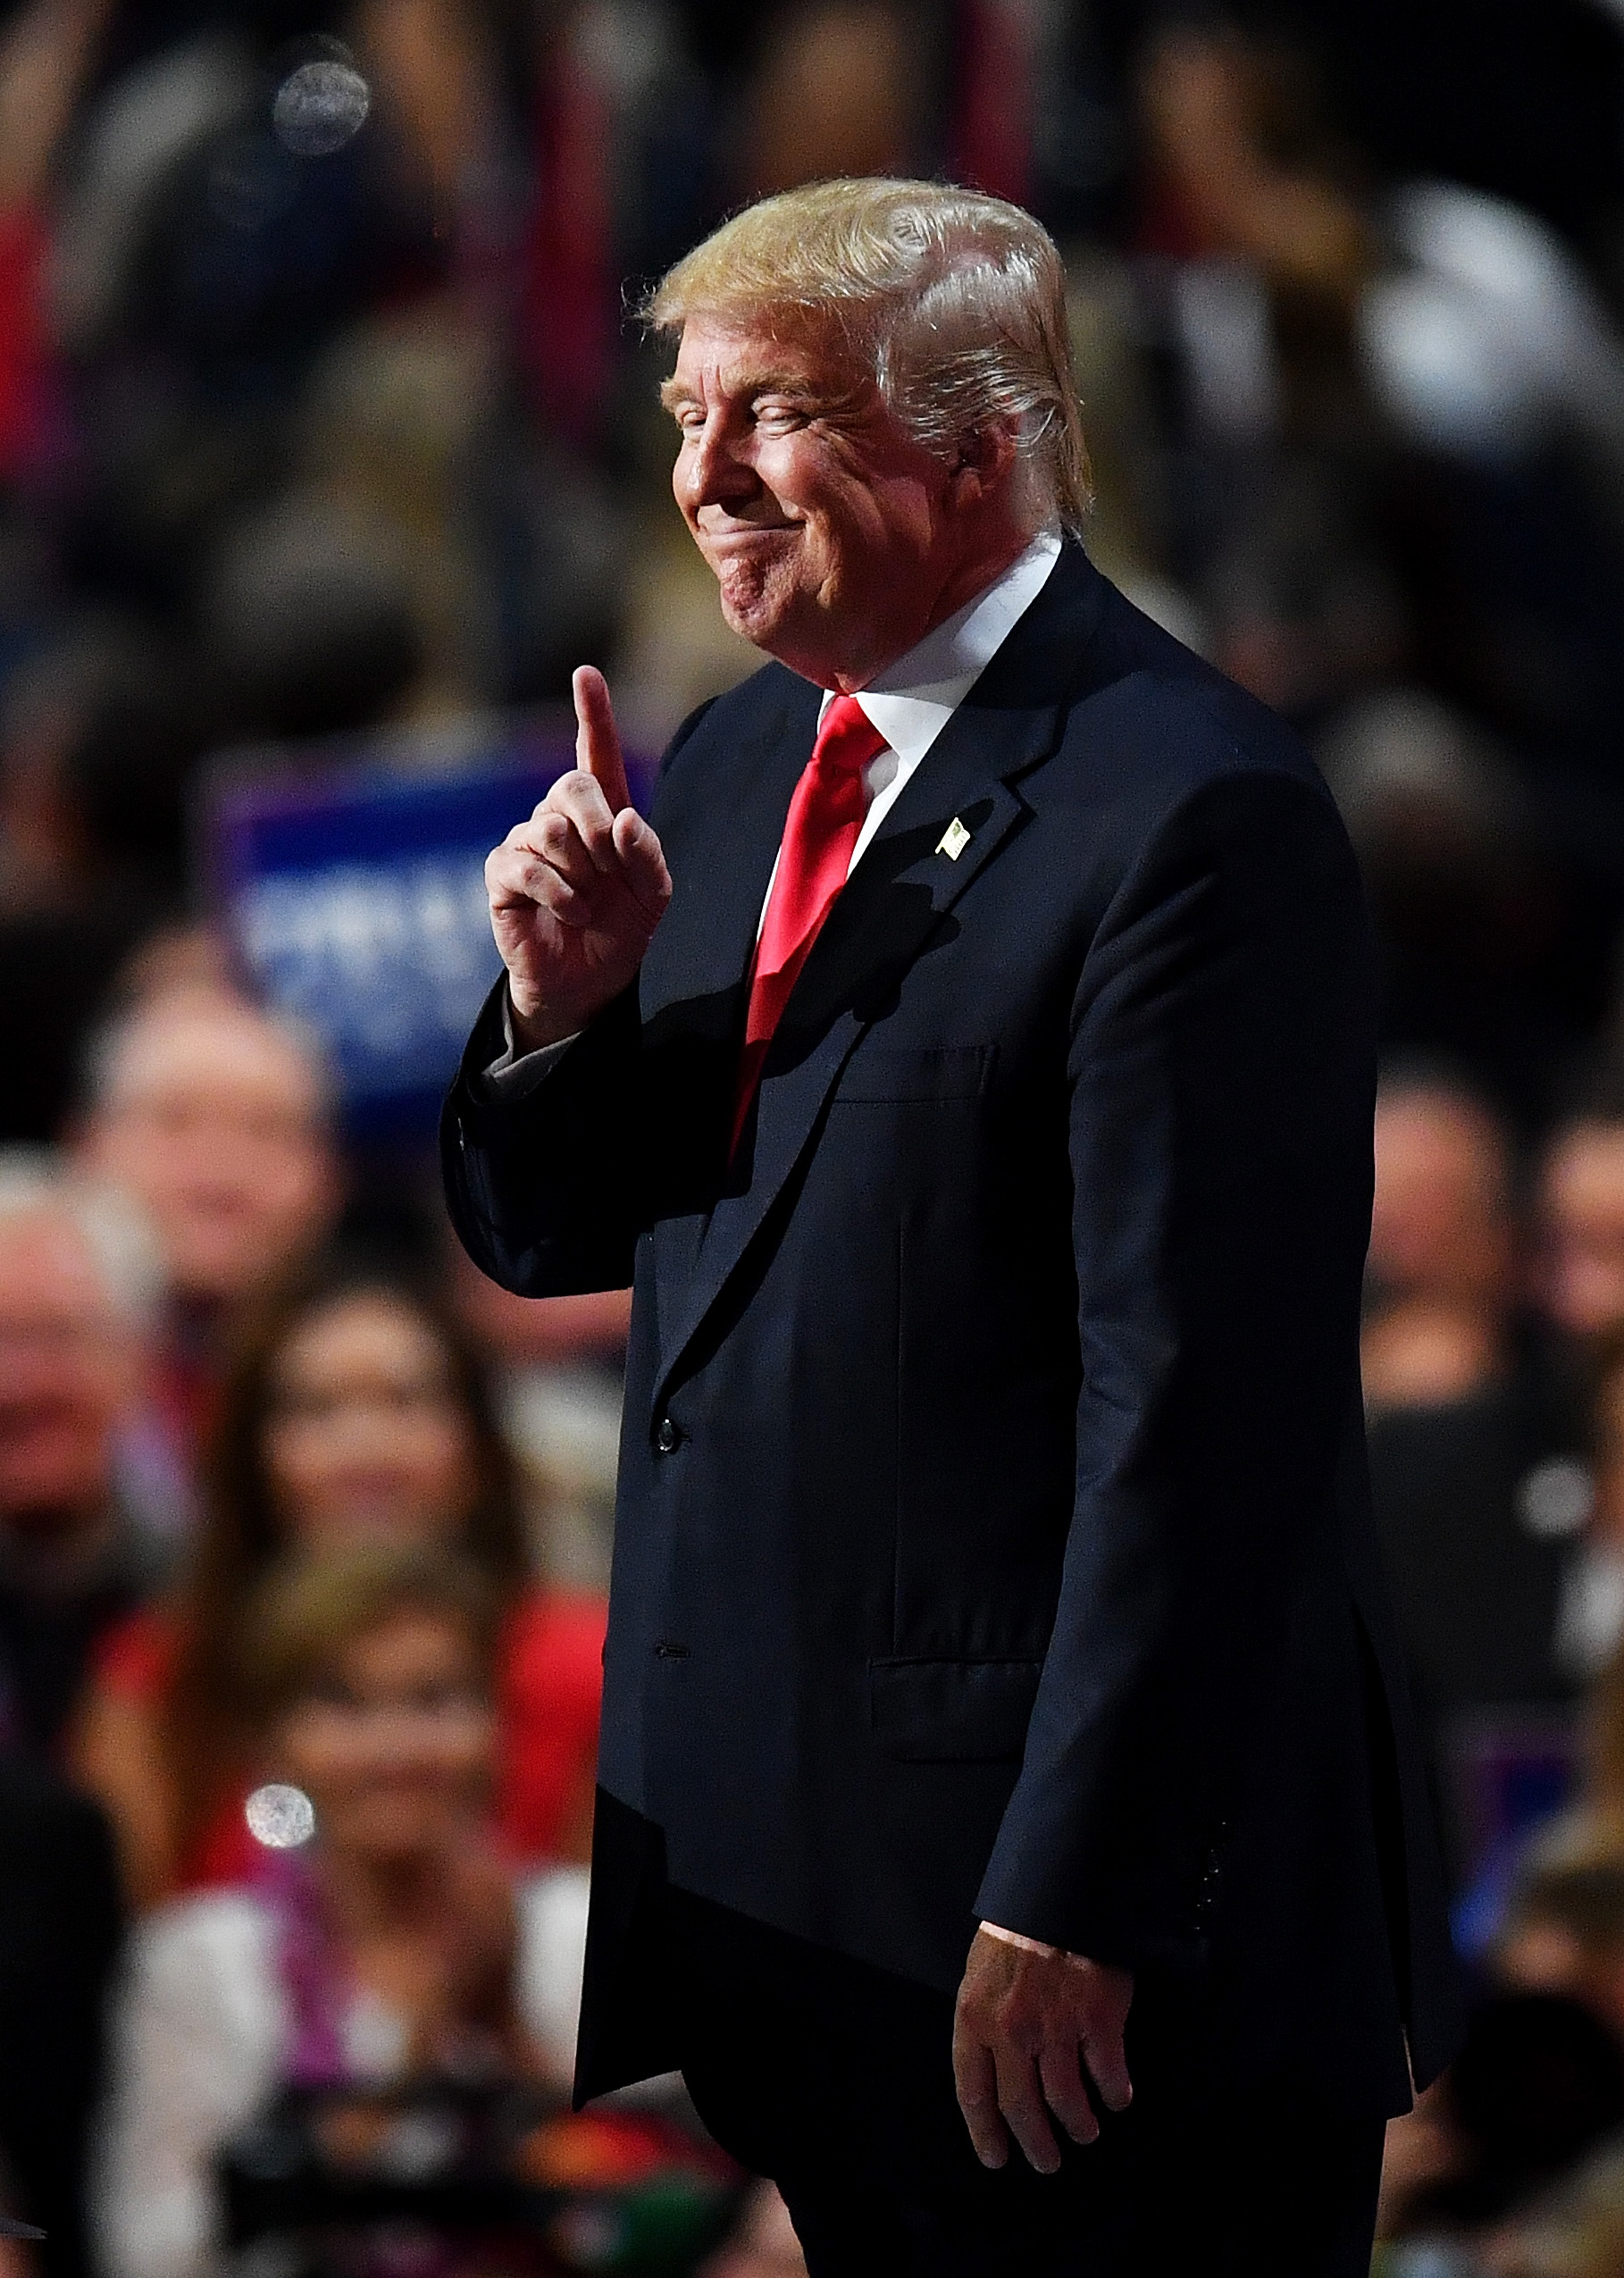 CLEVELAND, OH - JULY 21: Republican presidential candidate Donald Trump gestures to the crowd during his speech in the evening session on the fourth day of the Republican National Convention on July 21, 2016 at the Quicken Loans Arena in Cleveland, Ohio. Republican presidential candidate Donald Trump received the number of votes needed to secure the party's nomination. An estimated 50,000 people are expected in Cleveland, including hundreds of protesters and members of the media. The four-day Republican National Convention kicked off on July 18.   Jeff J Mitchell/Getty Images/AFP